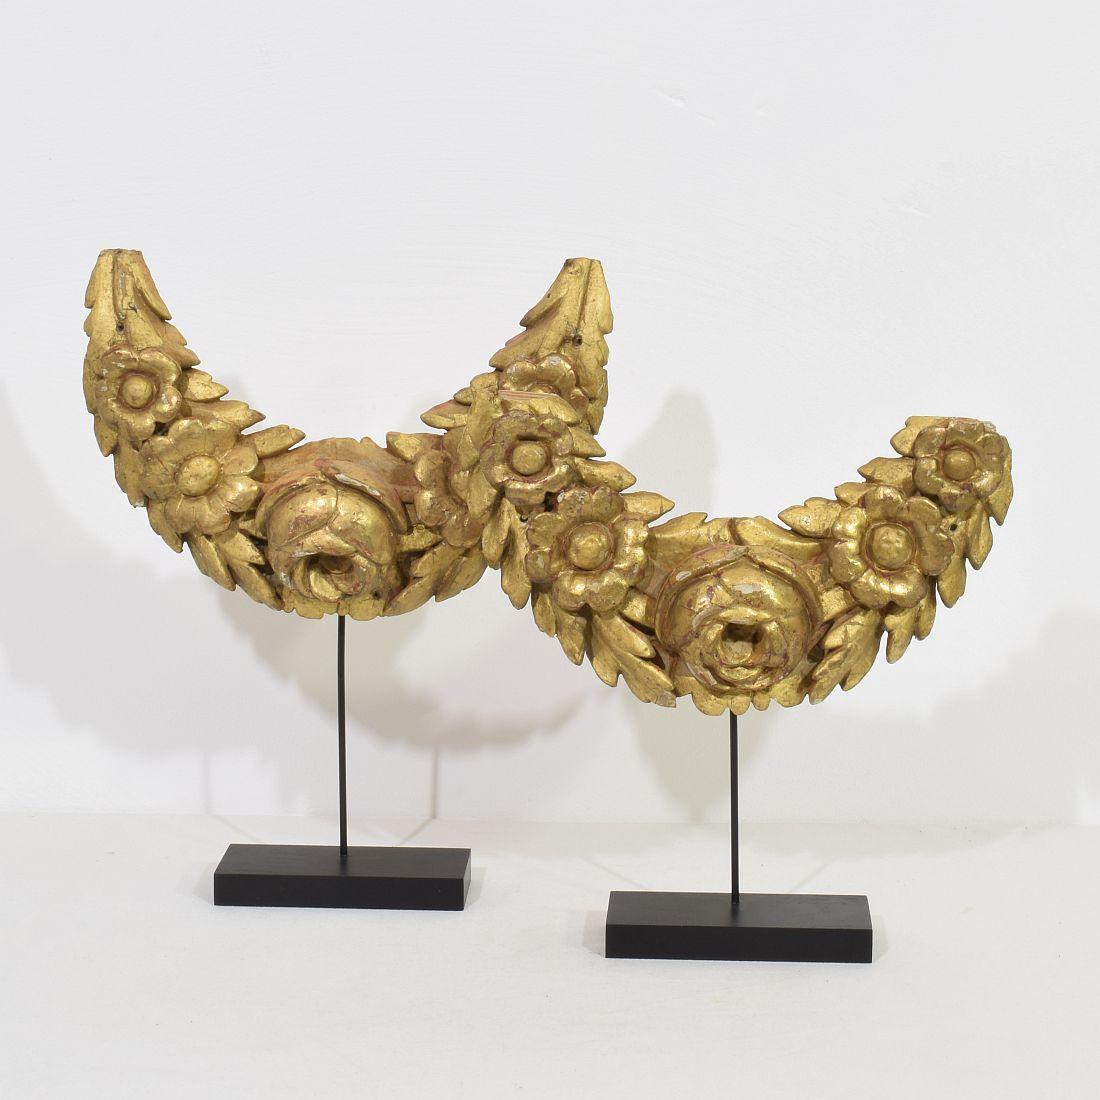 Wonderful pair of two baroque gilt wood garland fragments/ornaments,
Italy, circa 1650-1750. Weathered and small losses. Measurement here below of the largest one and includes the wooden base.